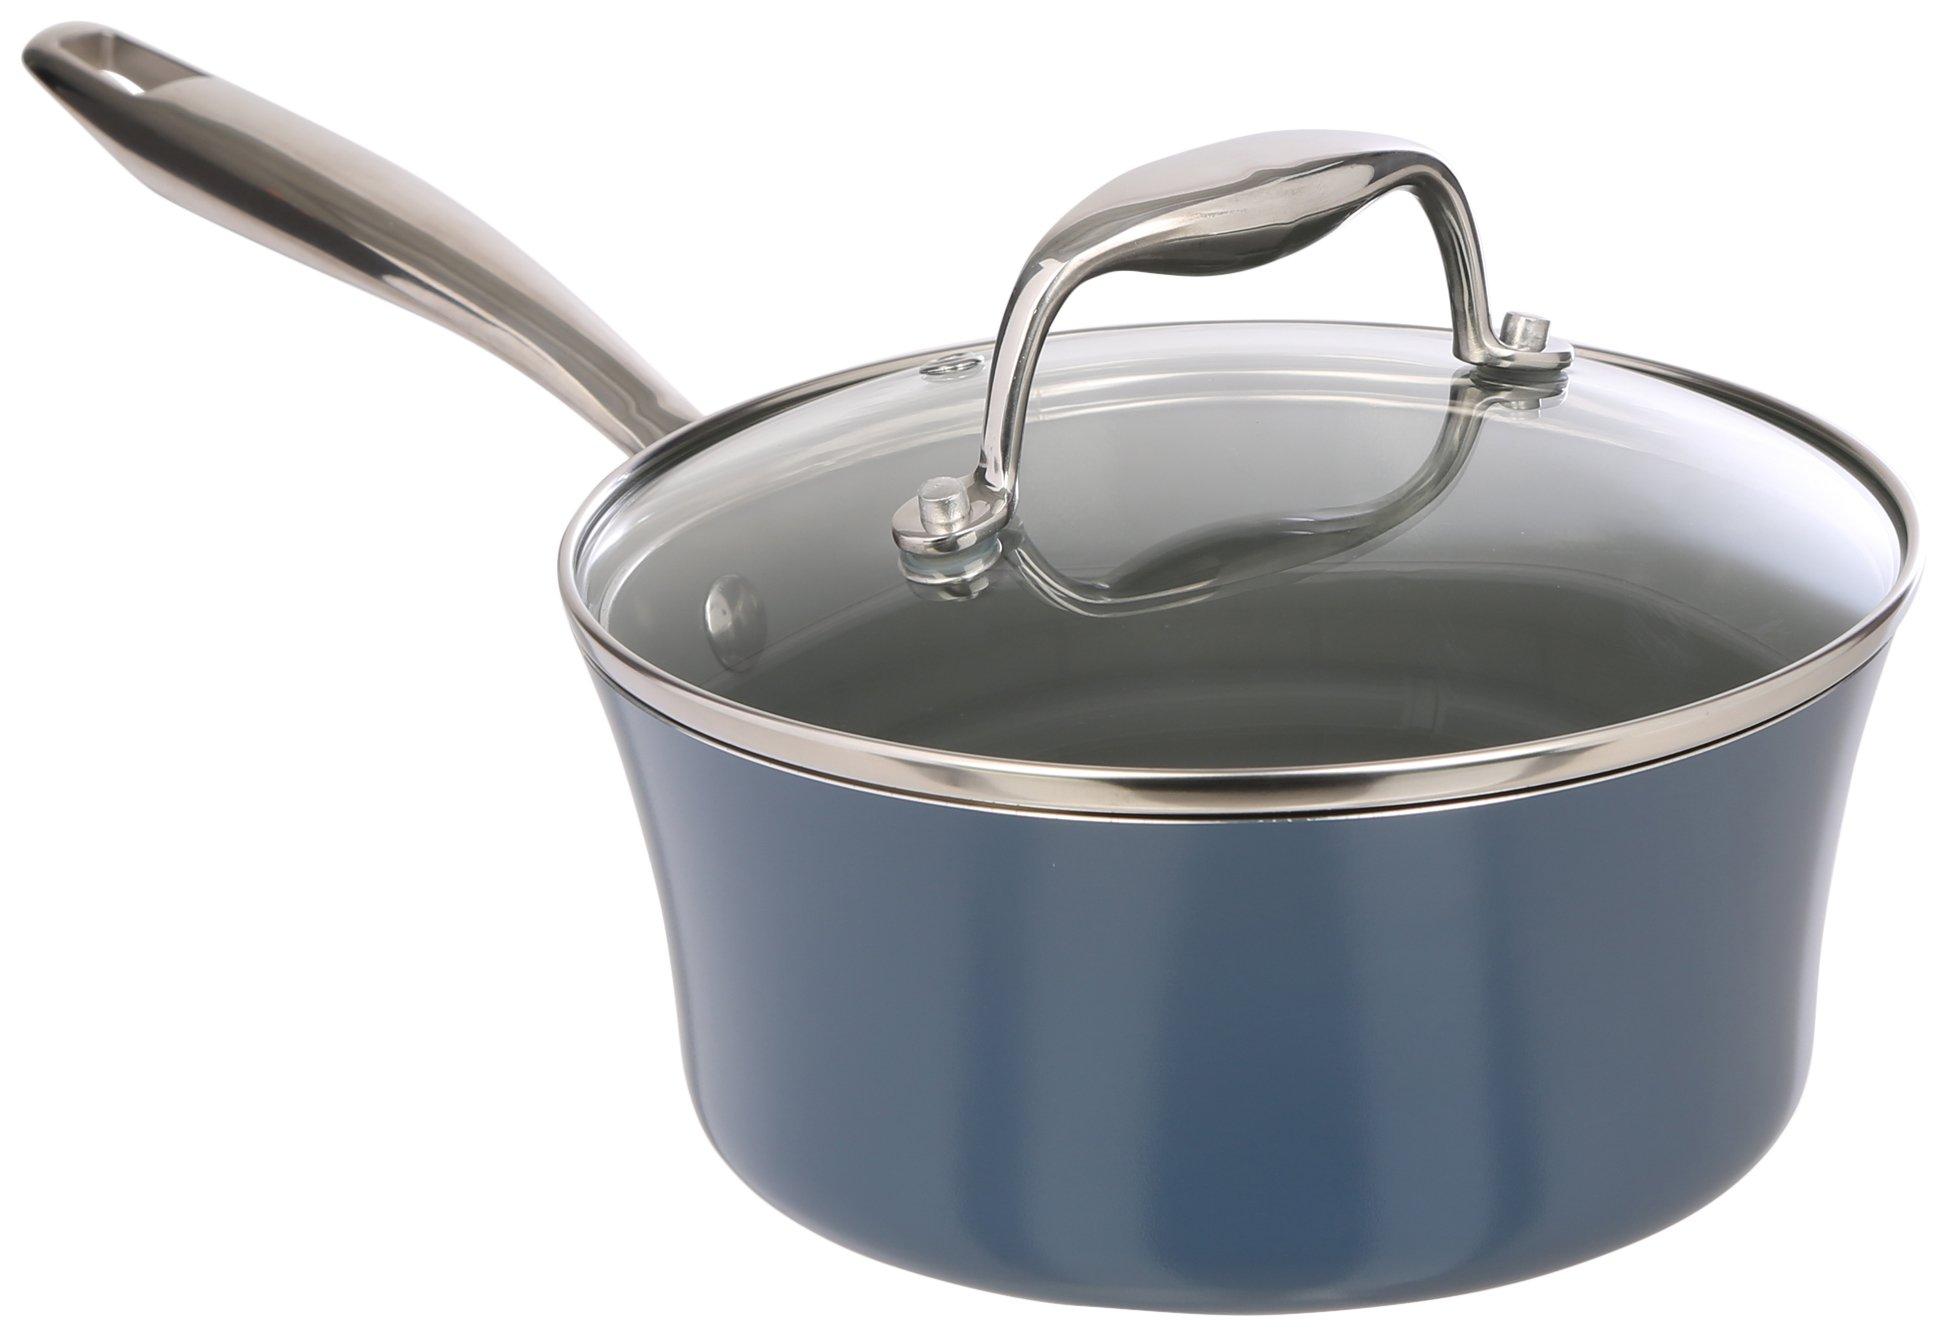 Zest Kitchen and Home Ceramic Non-Stick Sauce Pan with Lid